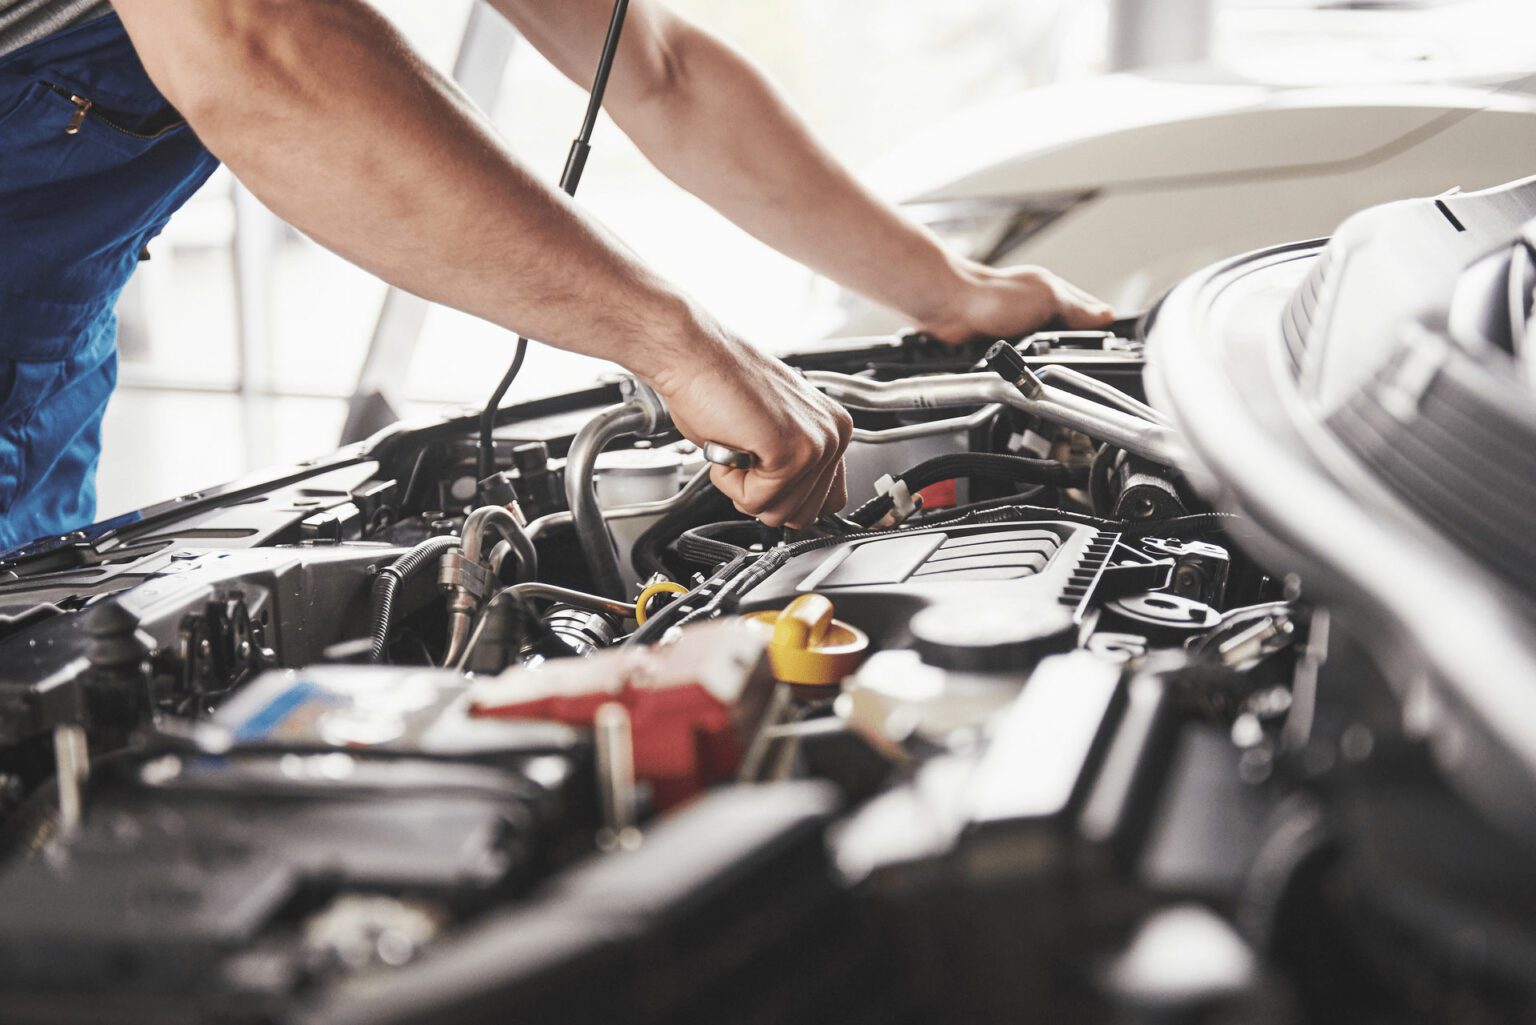 How to Know When Your Car Engine Needs Repair